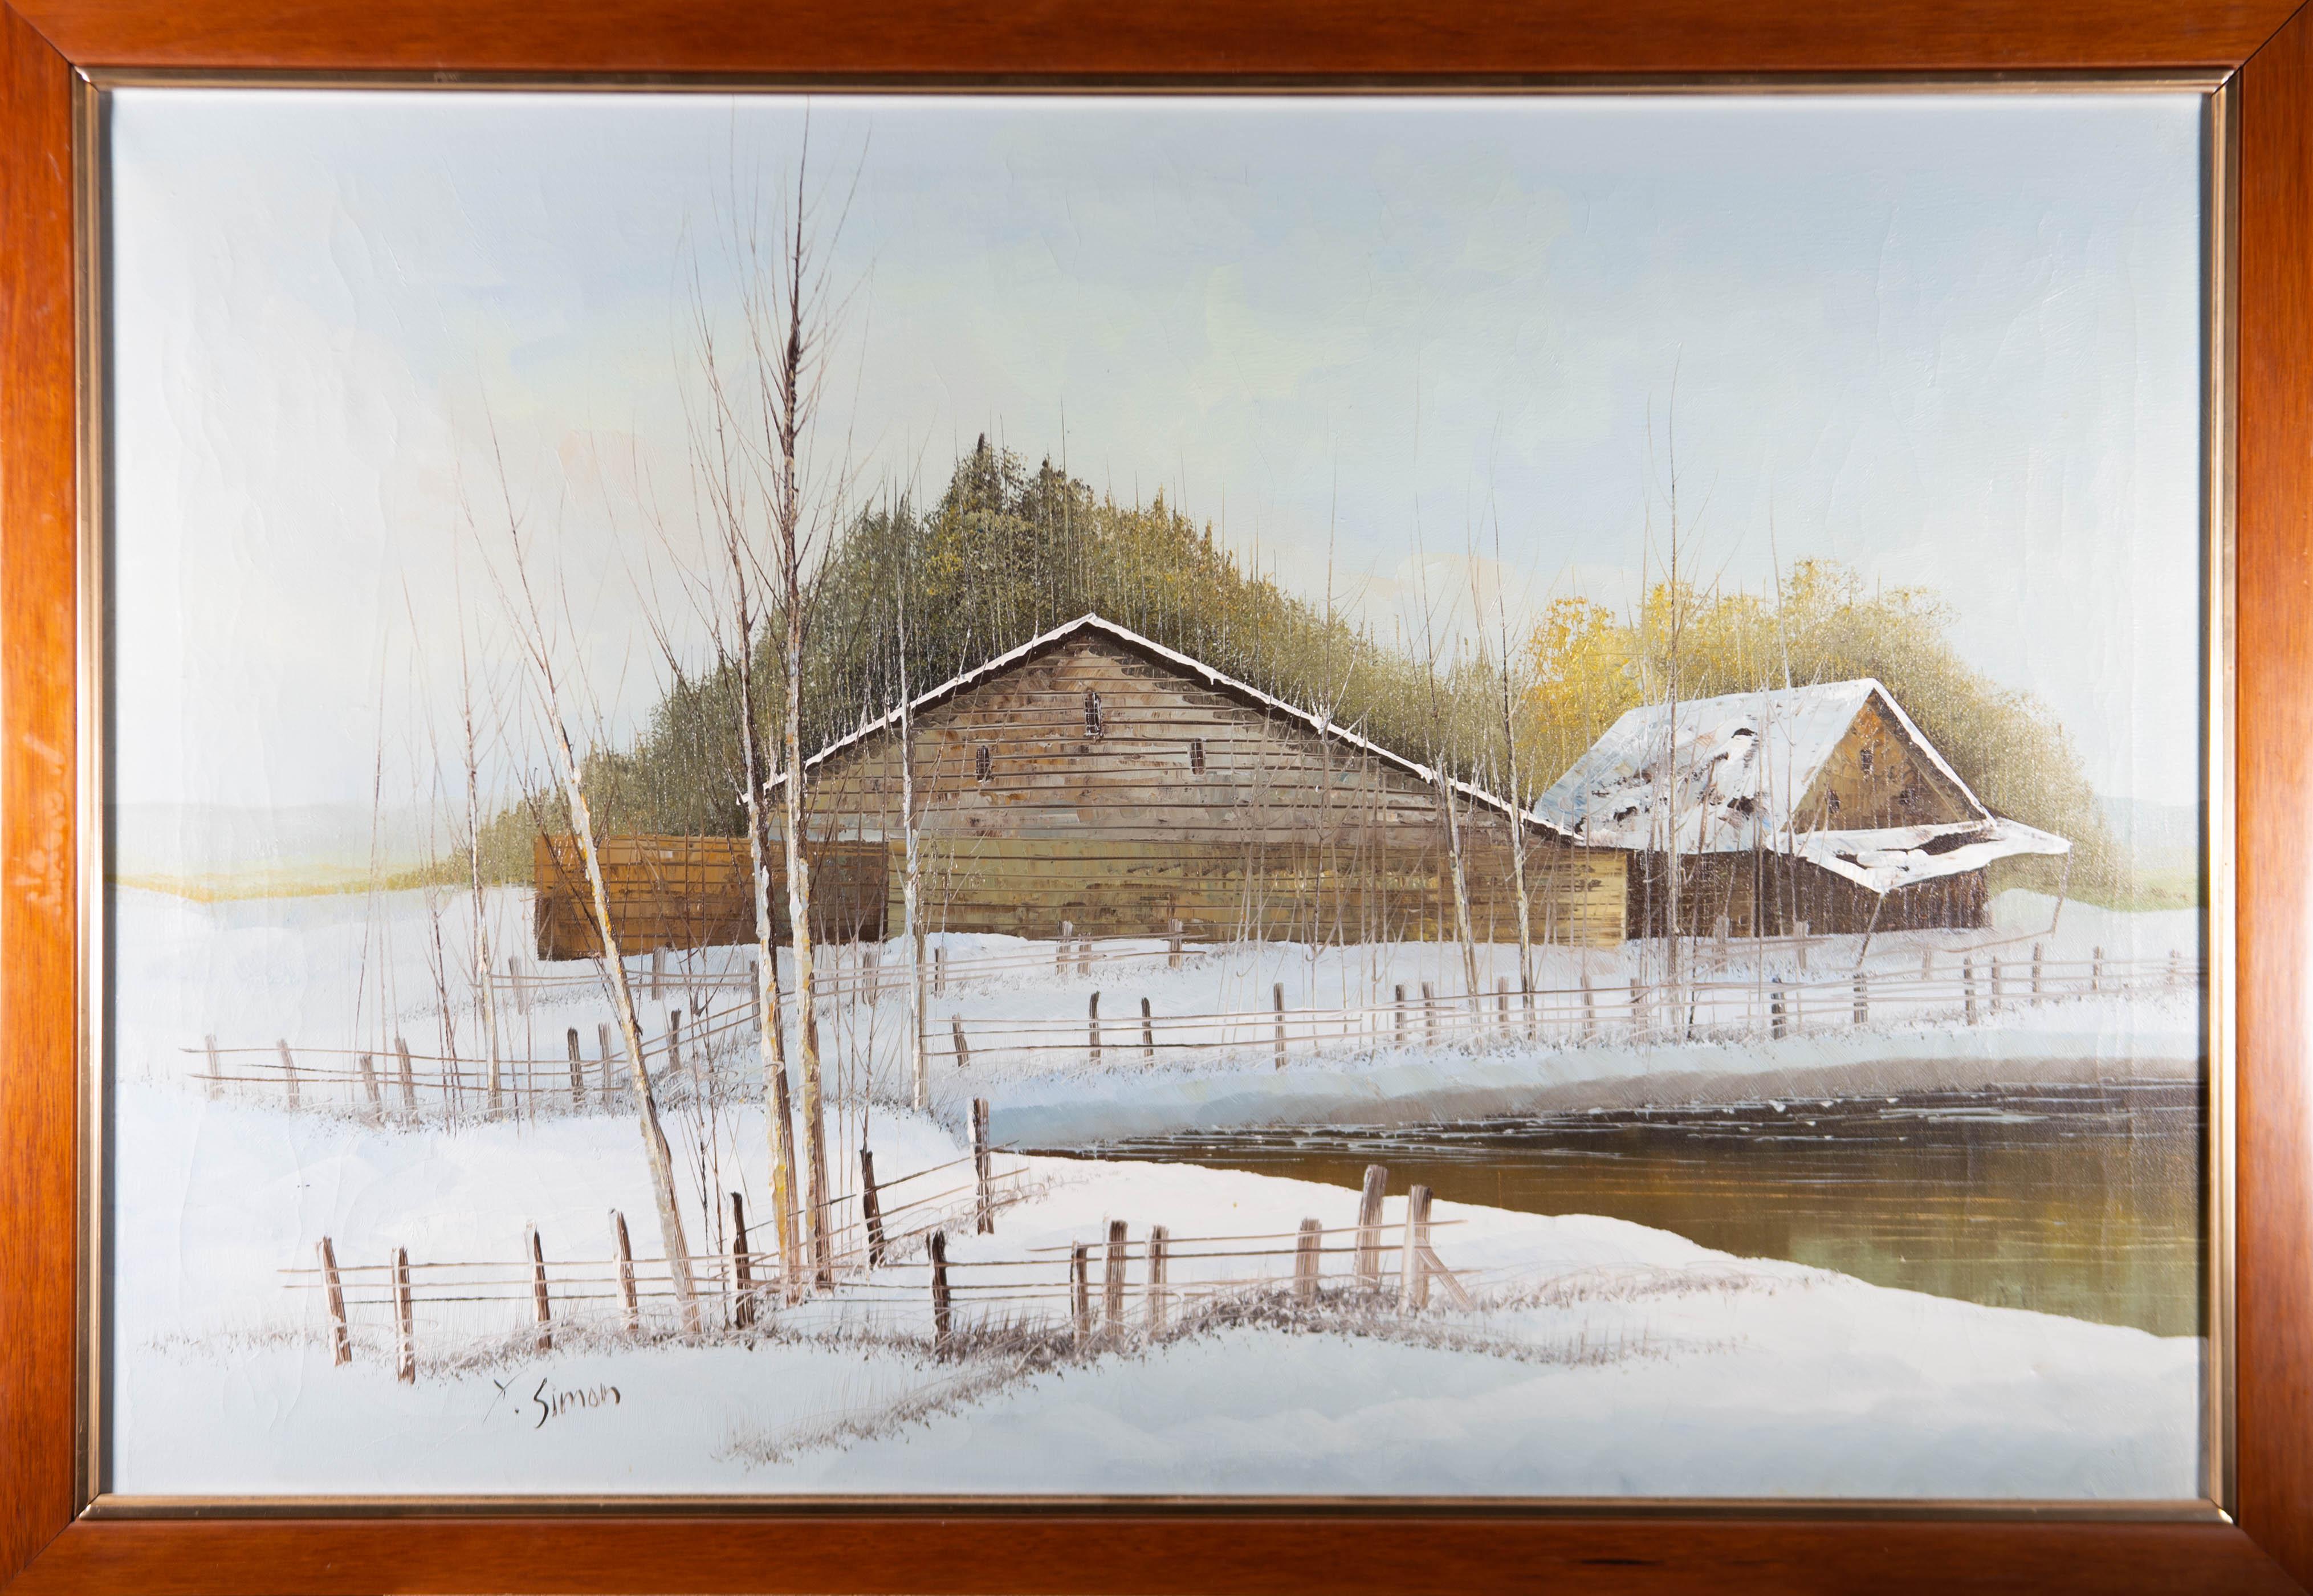 Unknown Landscape Painting - Y. Simon - Signed & Framed Mid 20th Century Oil, Snowy Barn